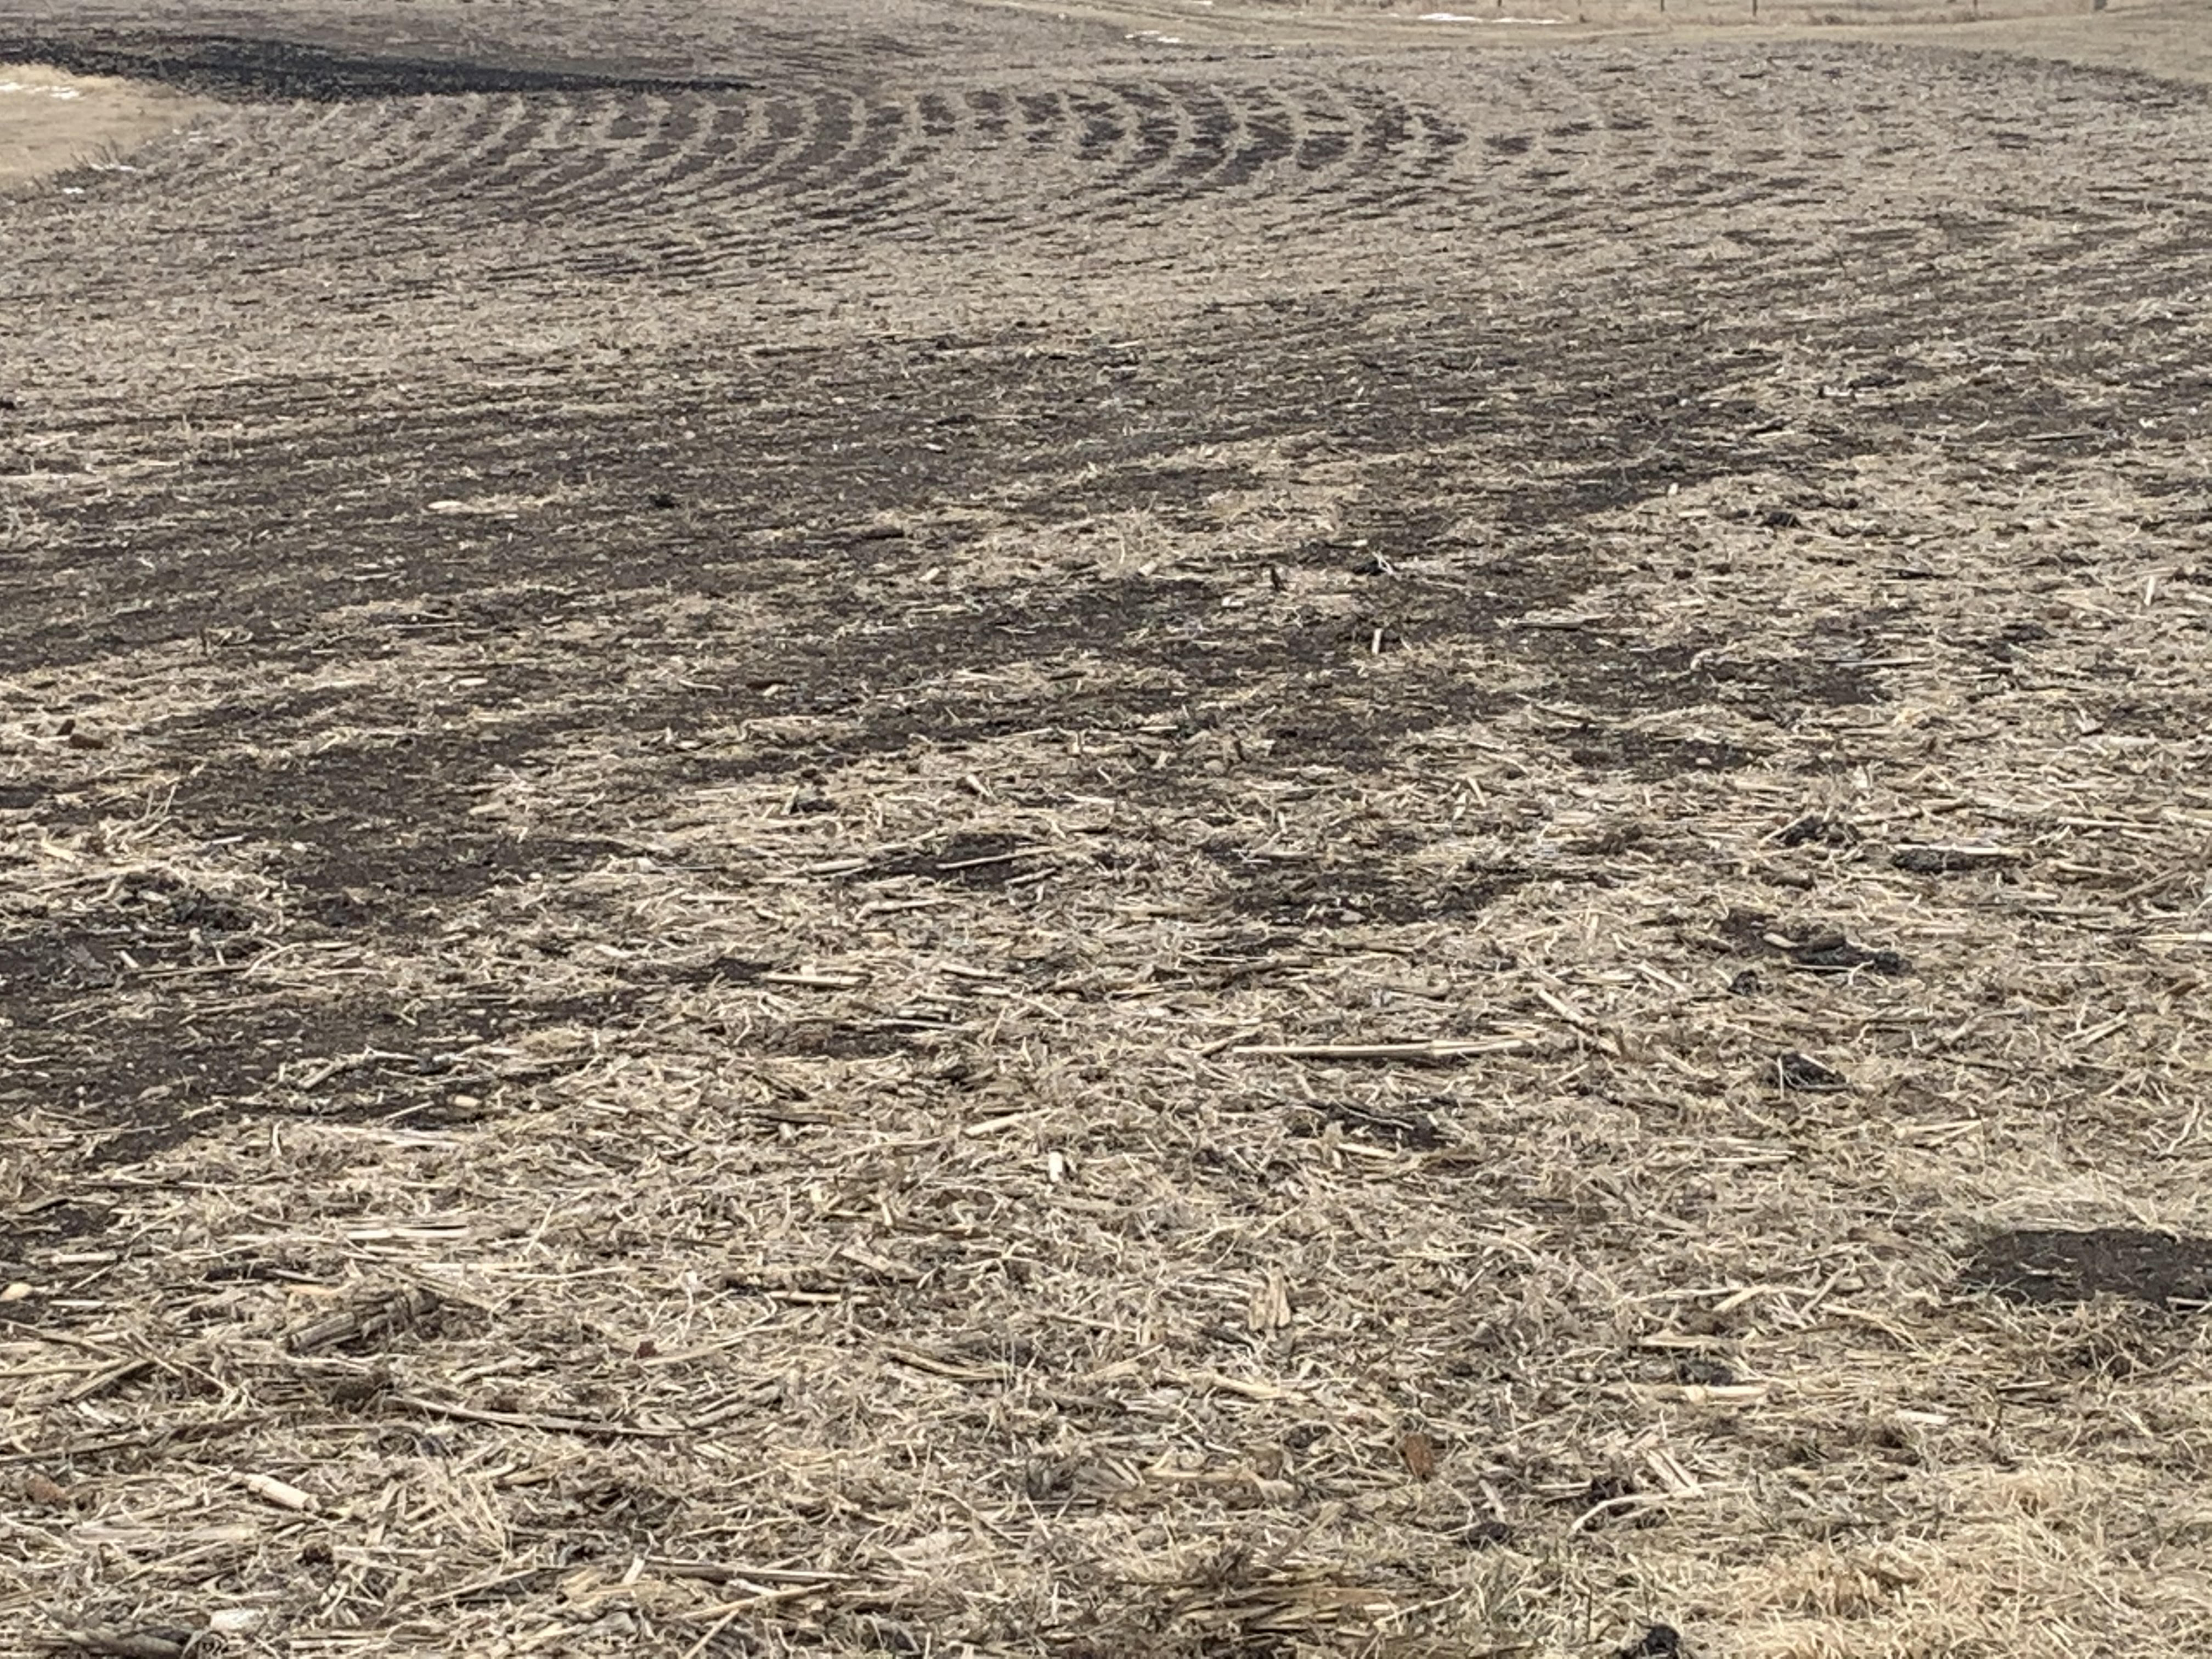 Afternoon Ag News, June 11, 2021: Caring for the soil during dry times